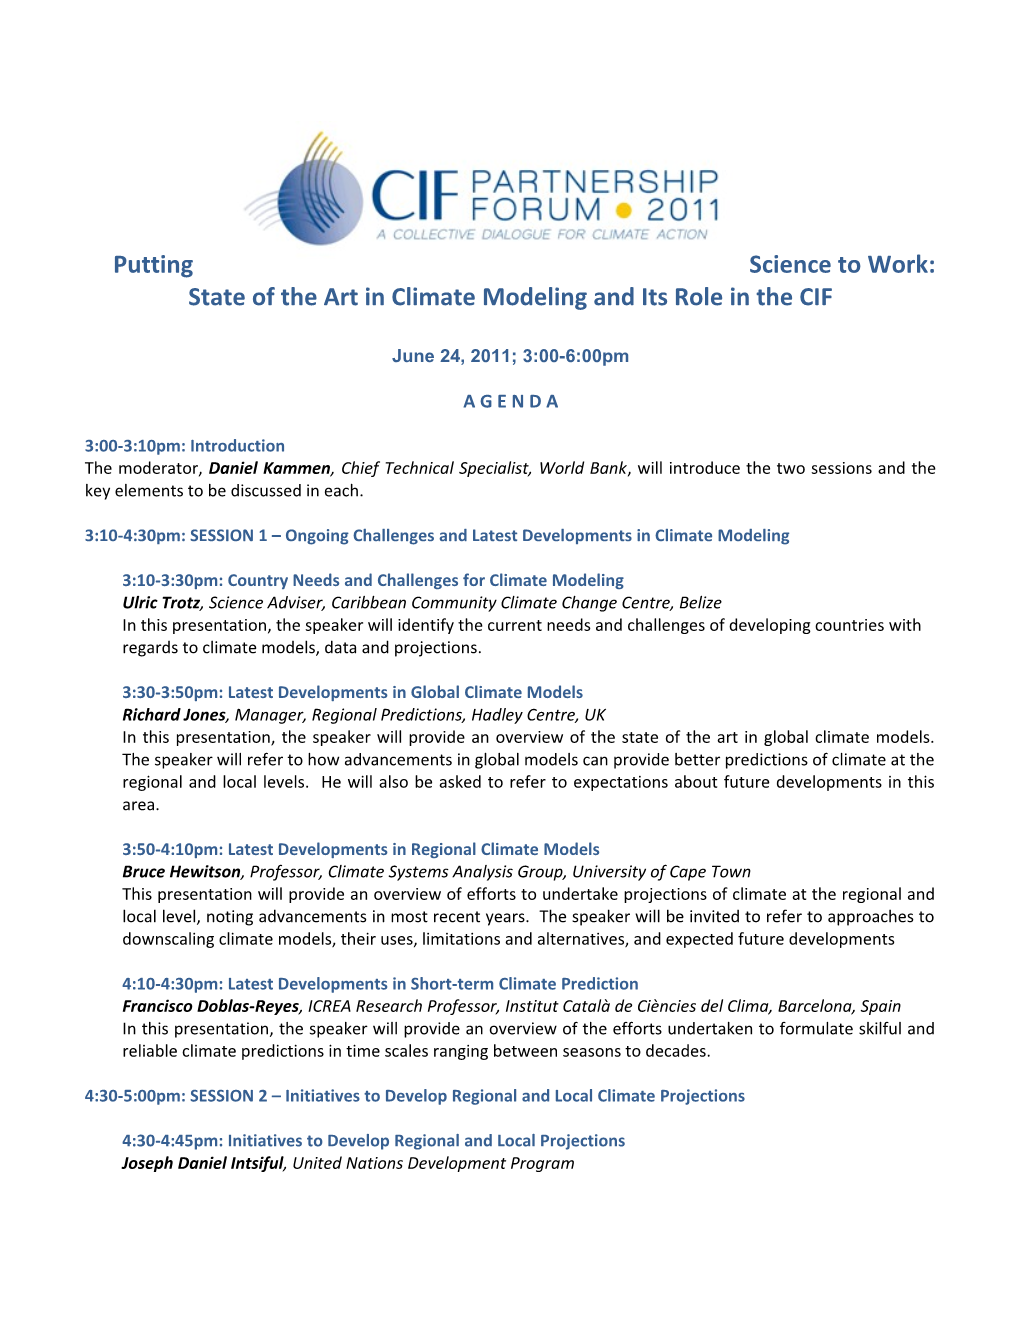 State of the Art in Climate Modeling and Its Role in the CIF